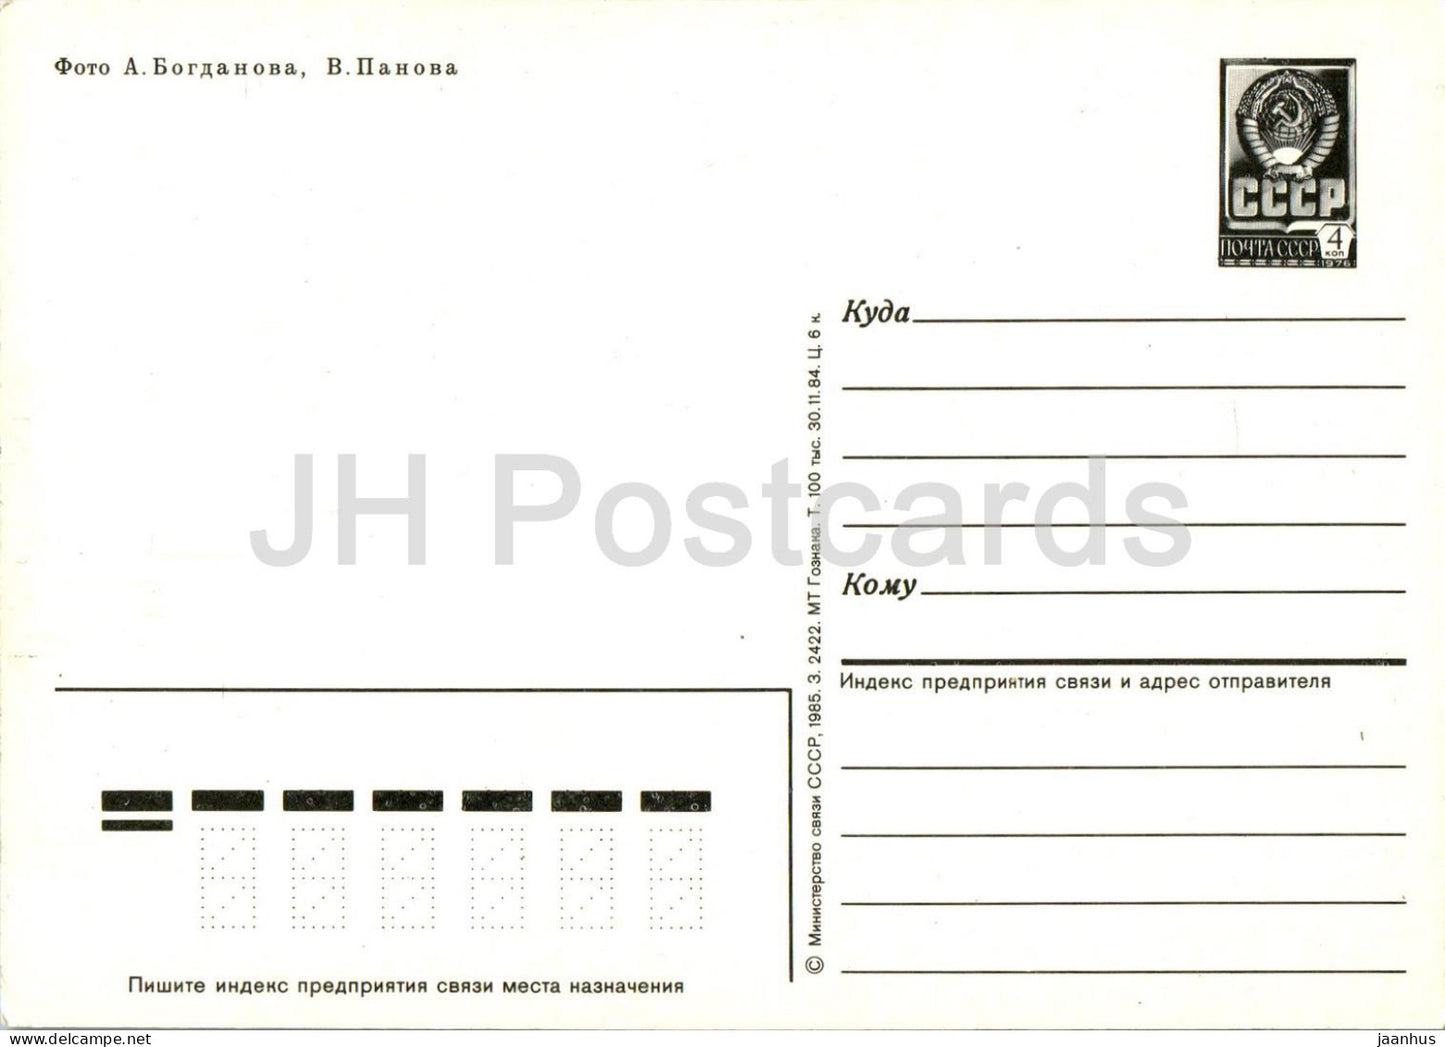 Sukhumi - Institute of Experimental Pathology and Therapy - Macaque - 1 - postal stationery - 1985 - Georgia - unused